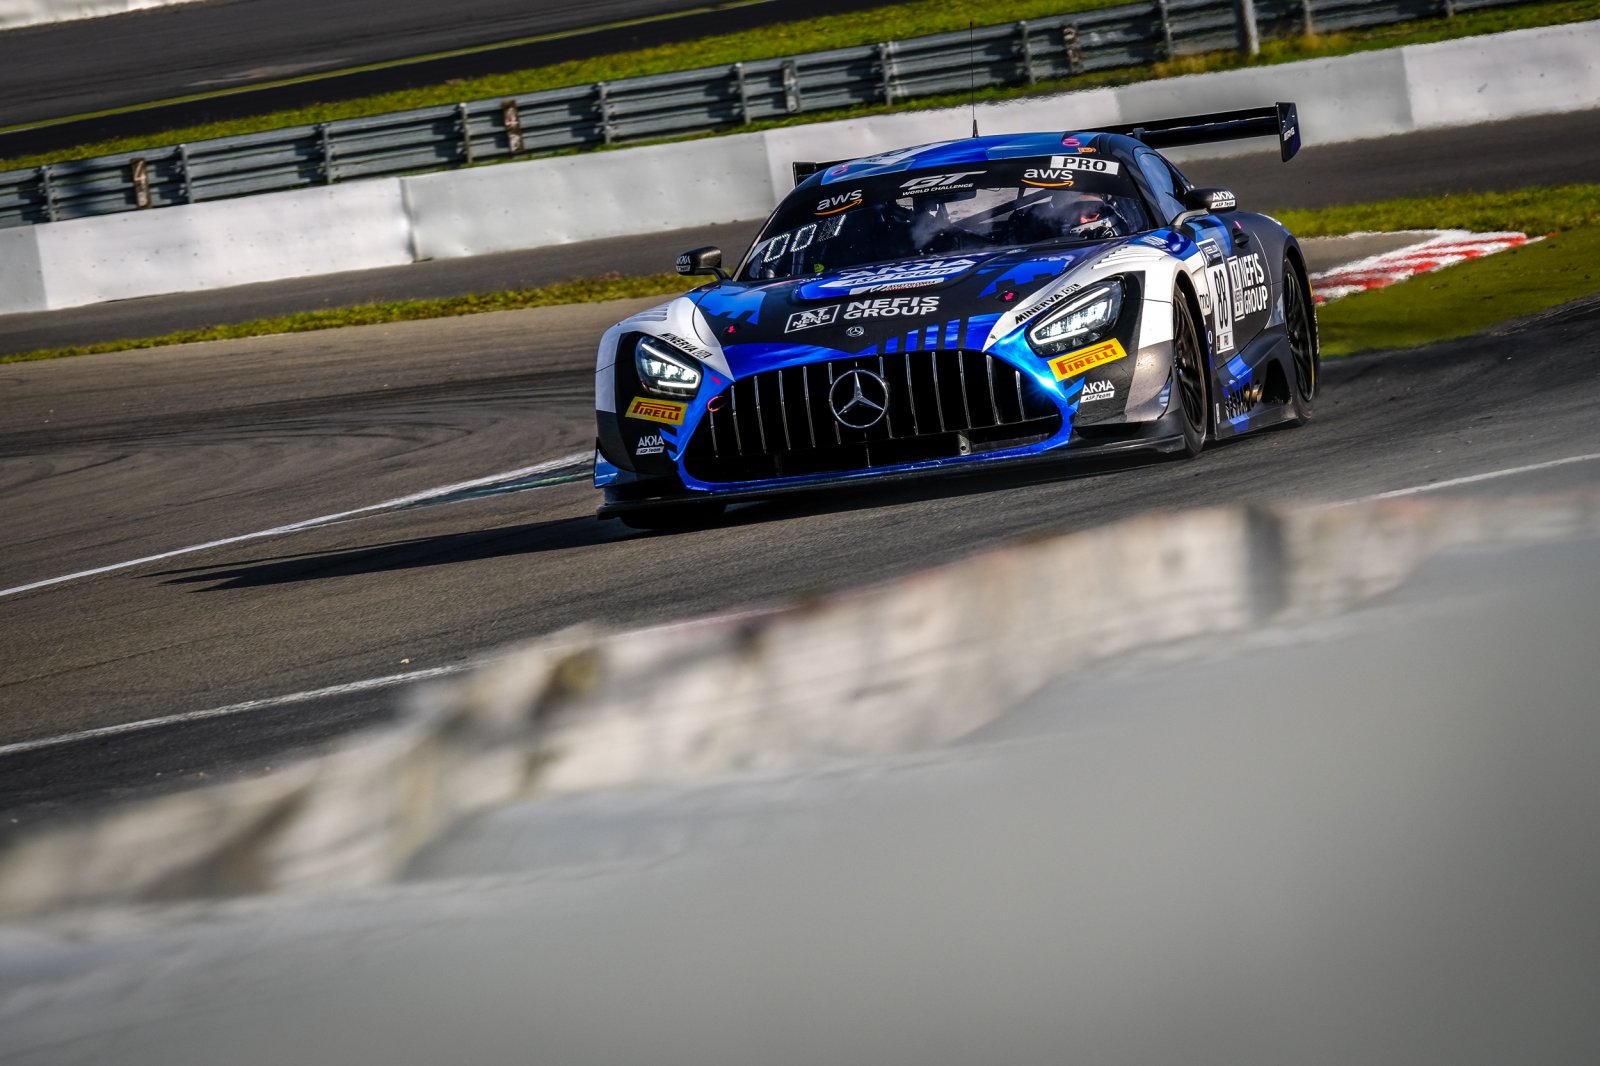 Marciello leads opening Nürburgring practice for AKKA ASP Mercedes-AMG